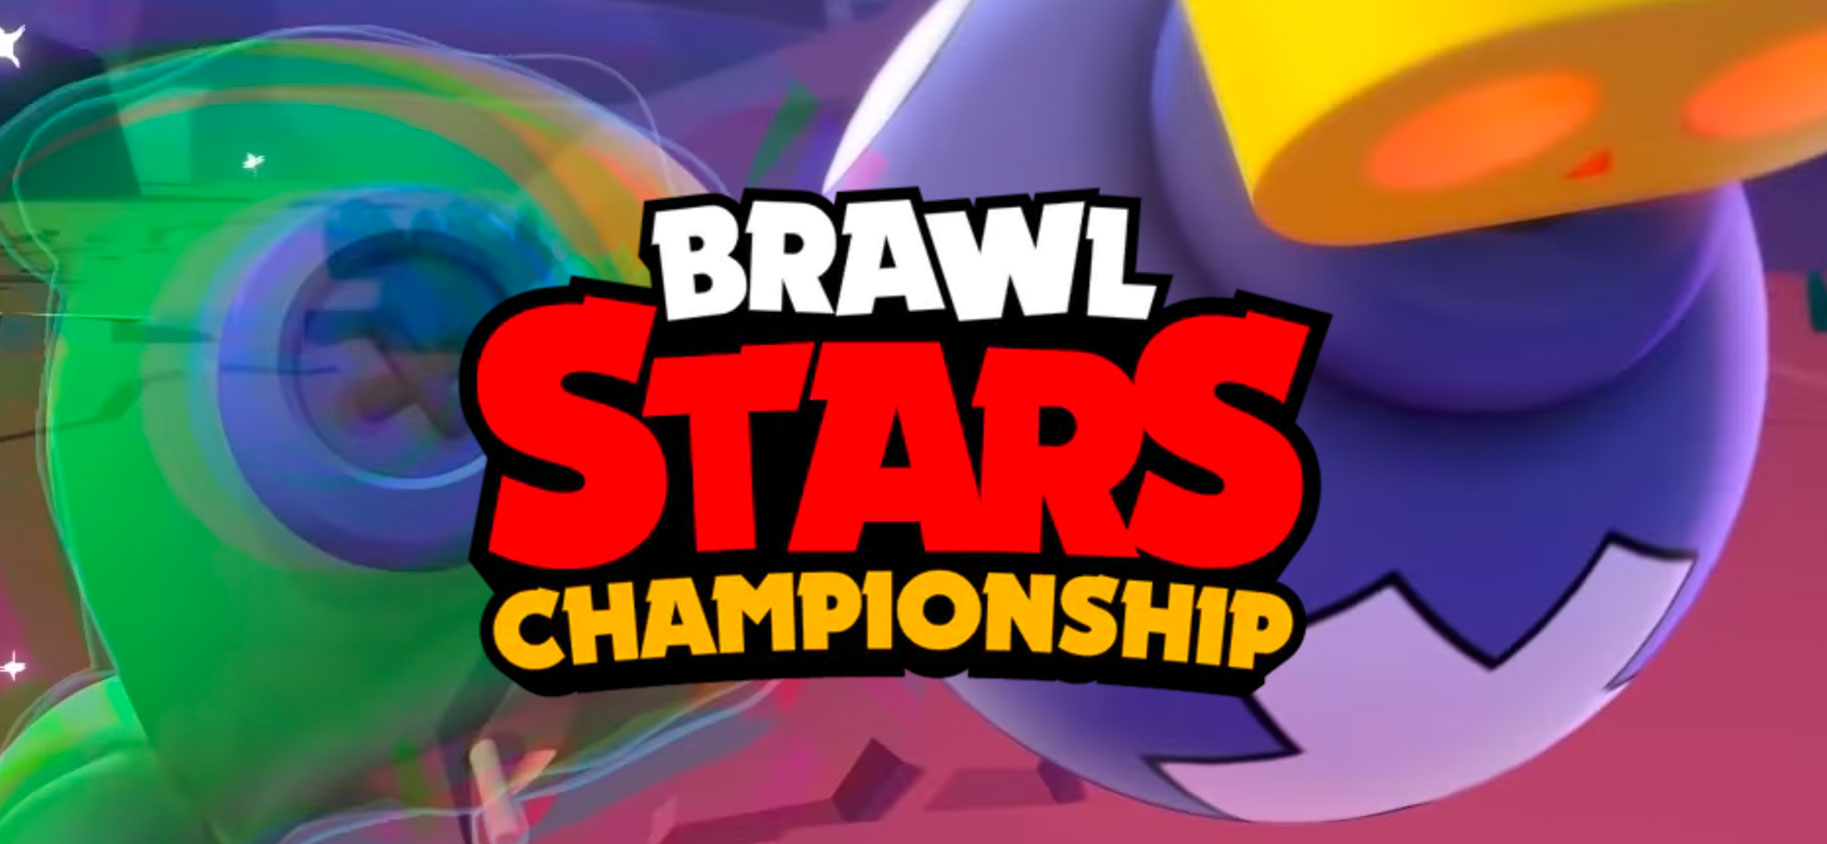 How was the performance of the Brawl Stars Championship 2020 qualifiers?